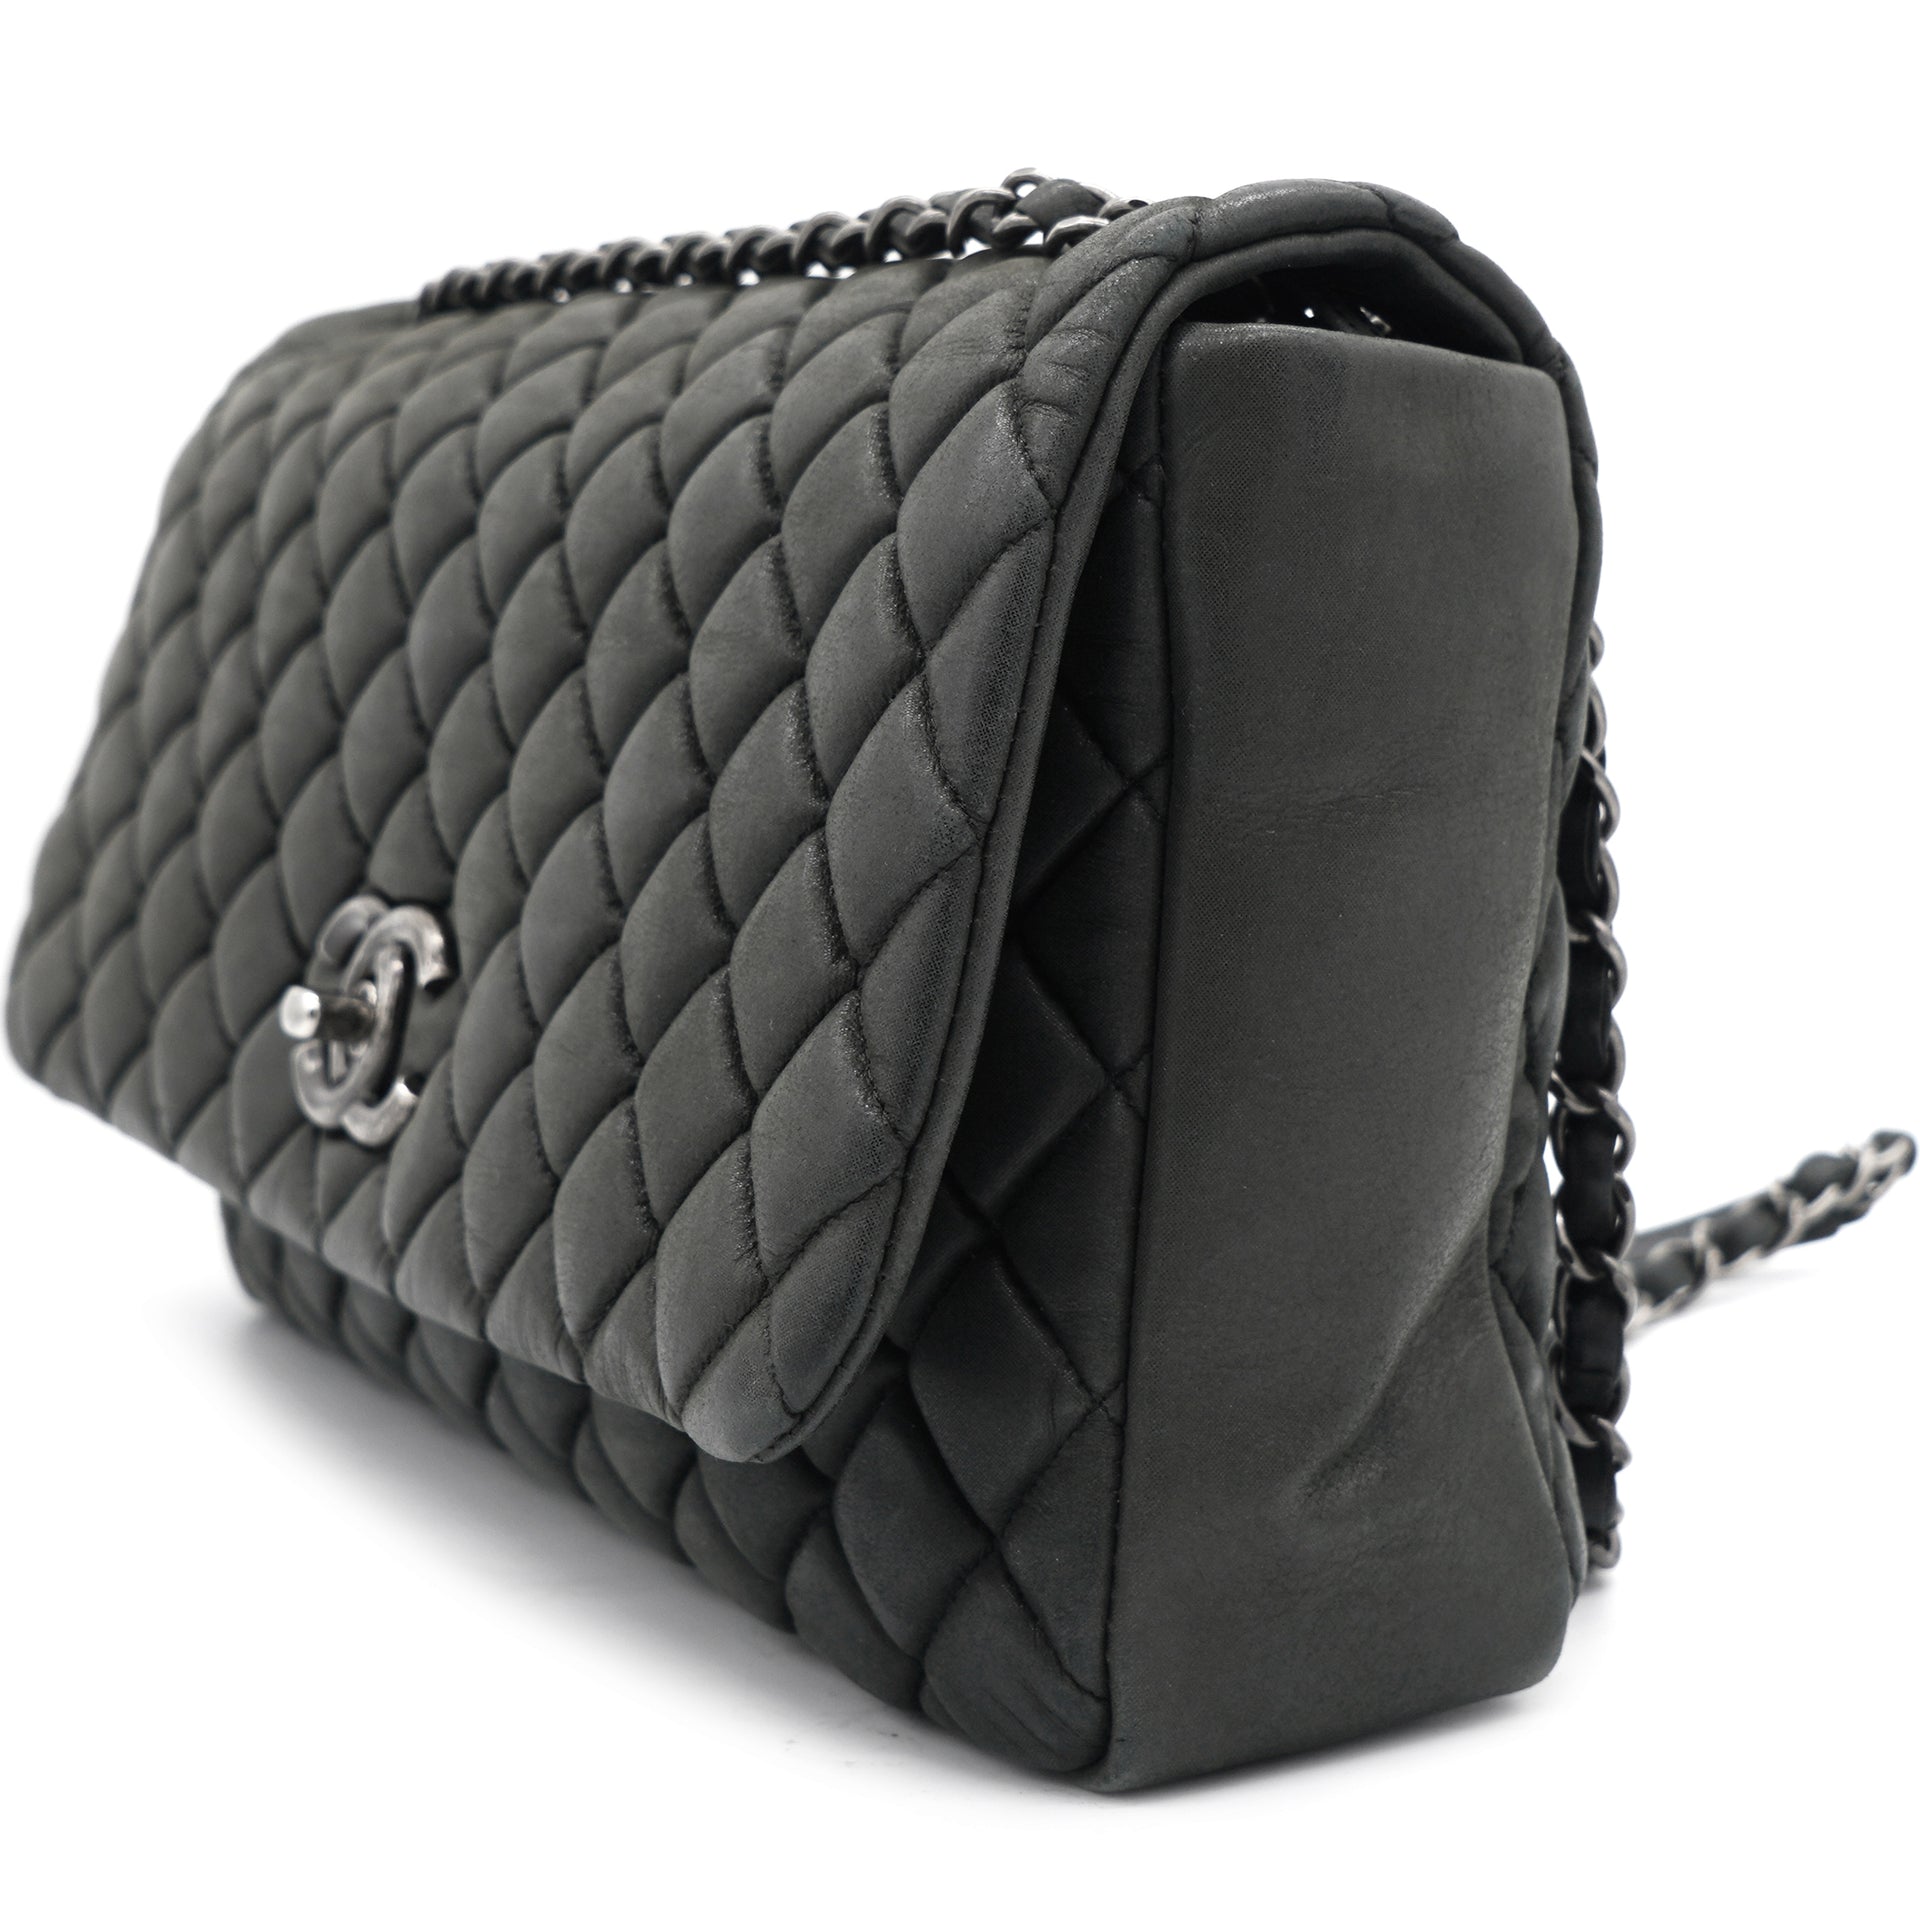 Chanel Black Quilted Leather CC Single Flap Bag – STYLISHTOP